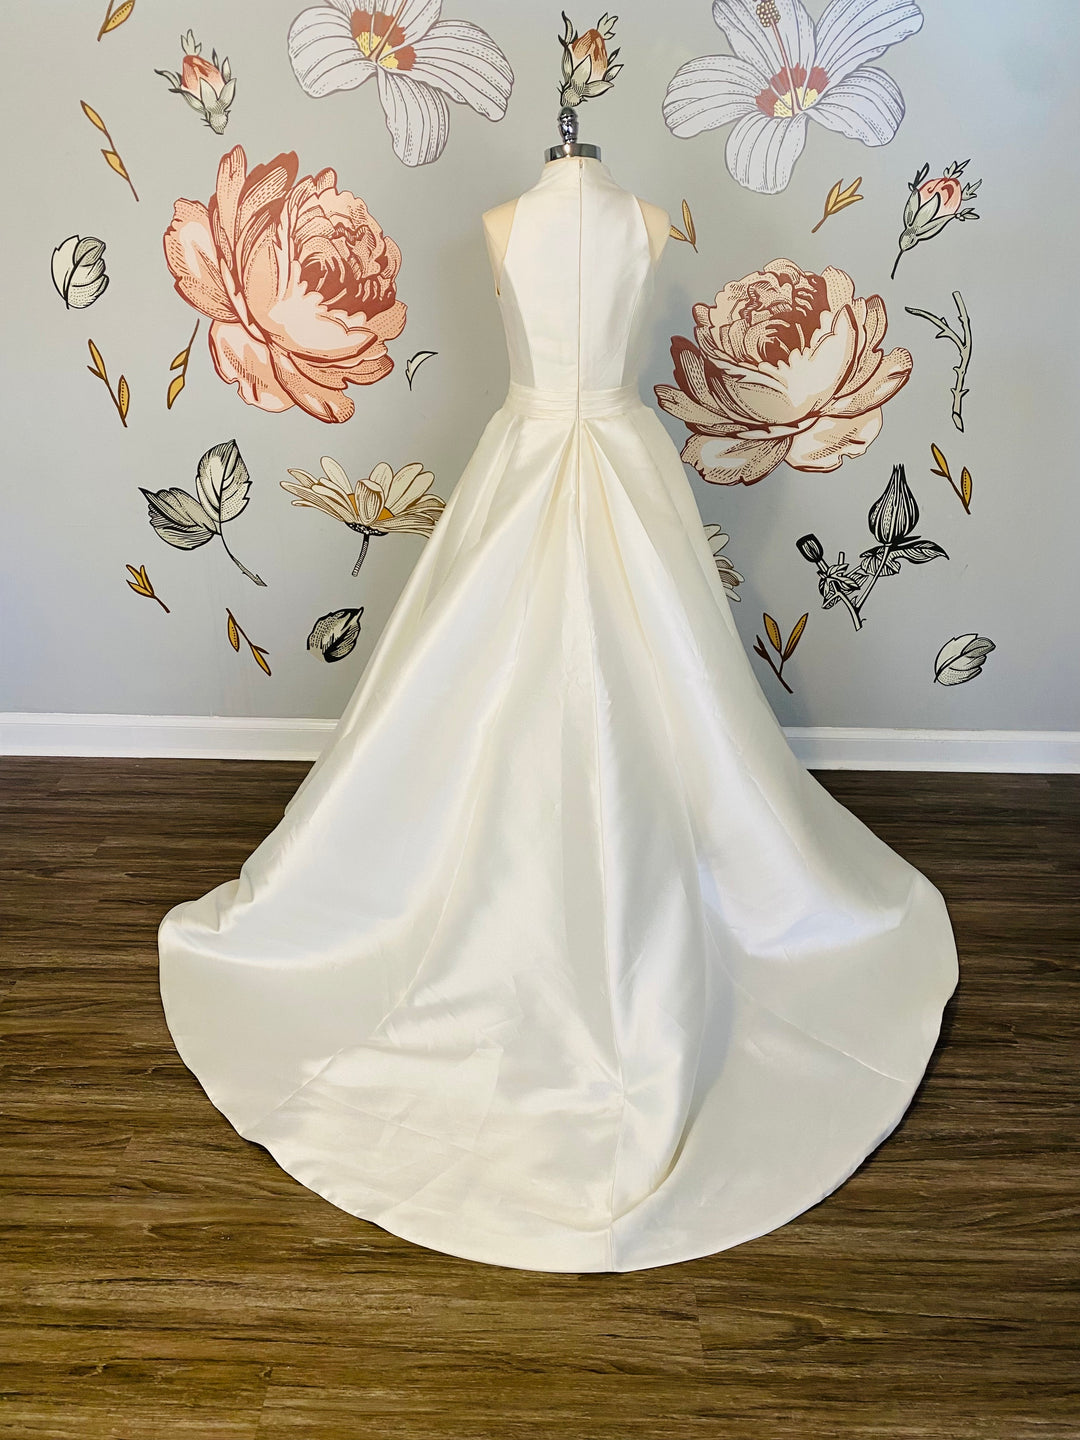 The 'Alicante' Gown by Modeca Size 10